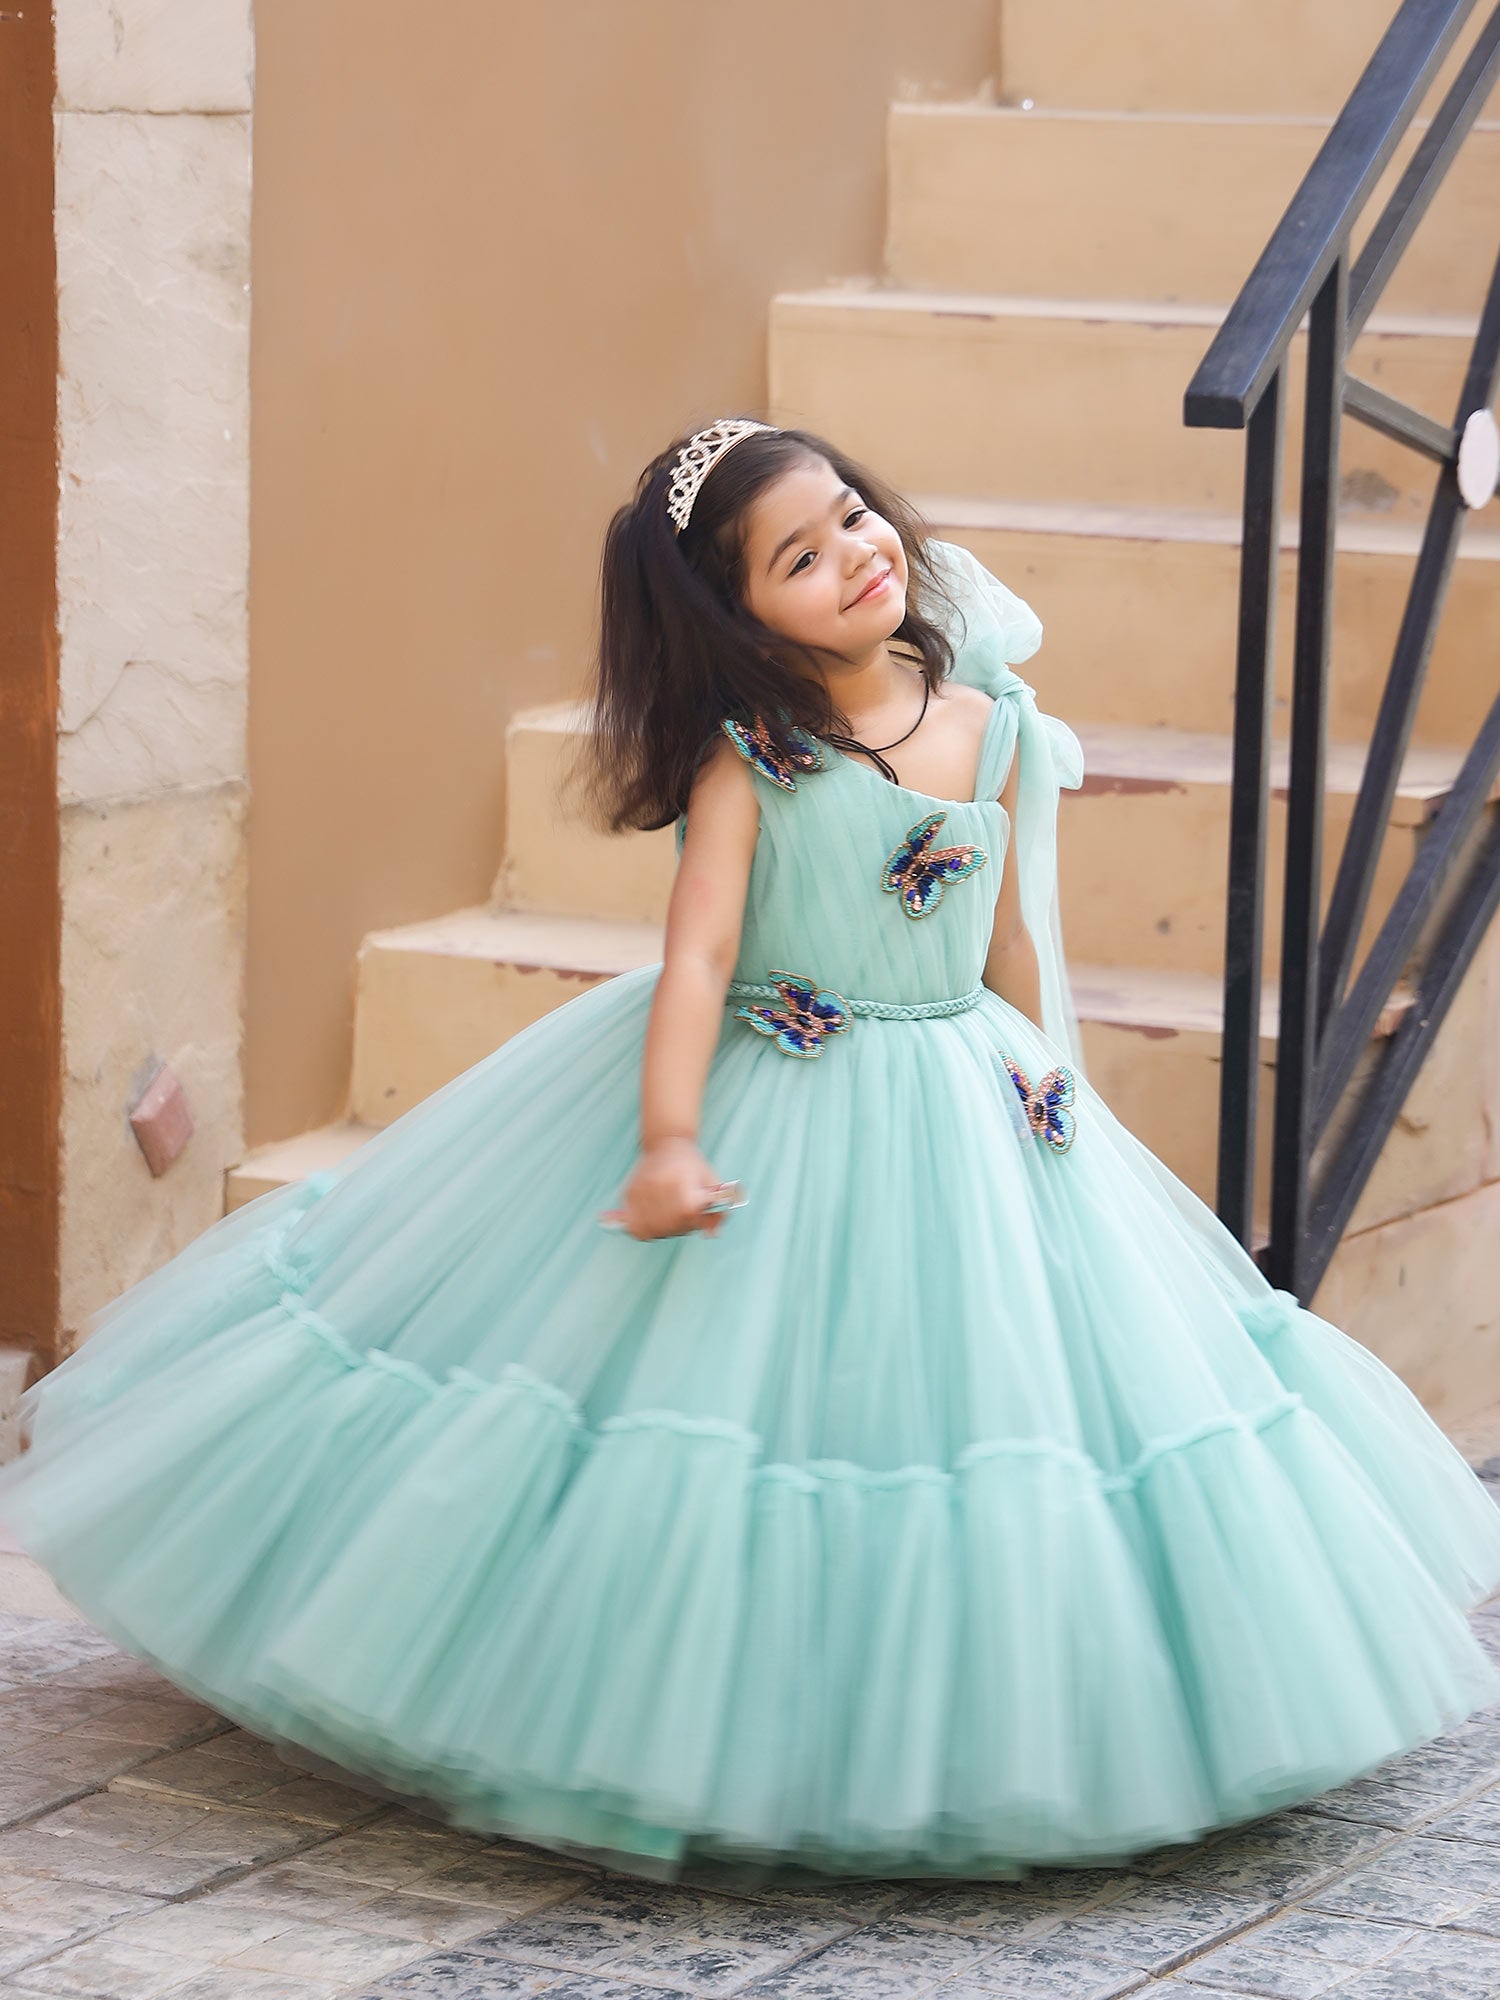 Green Marissa Princess Gown with hair accessory